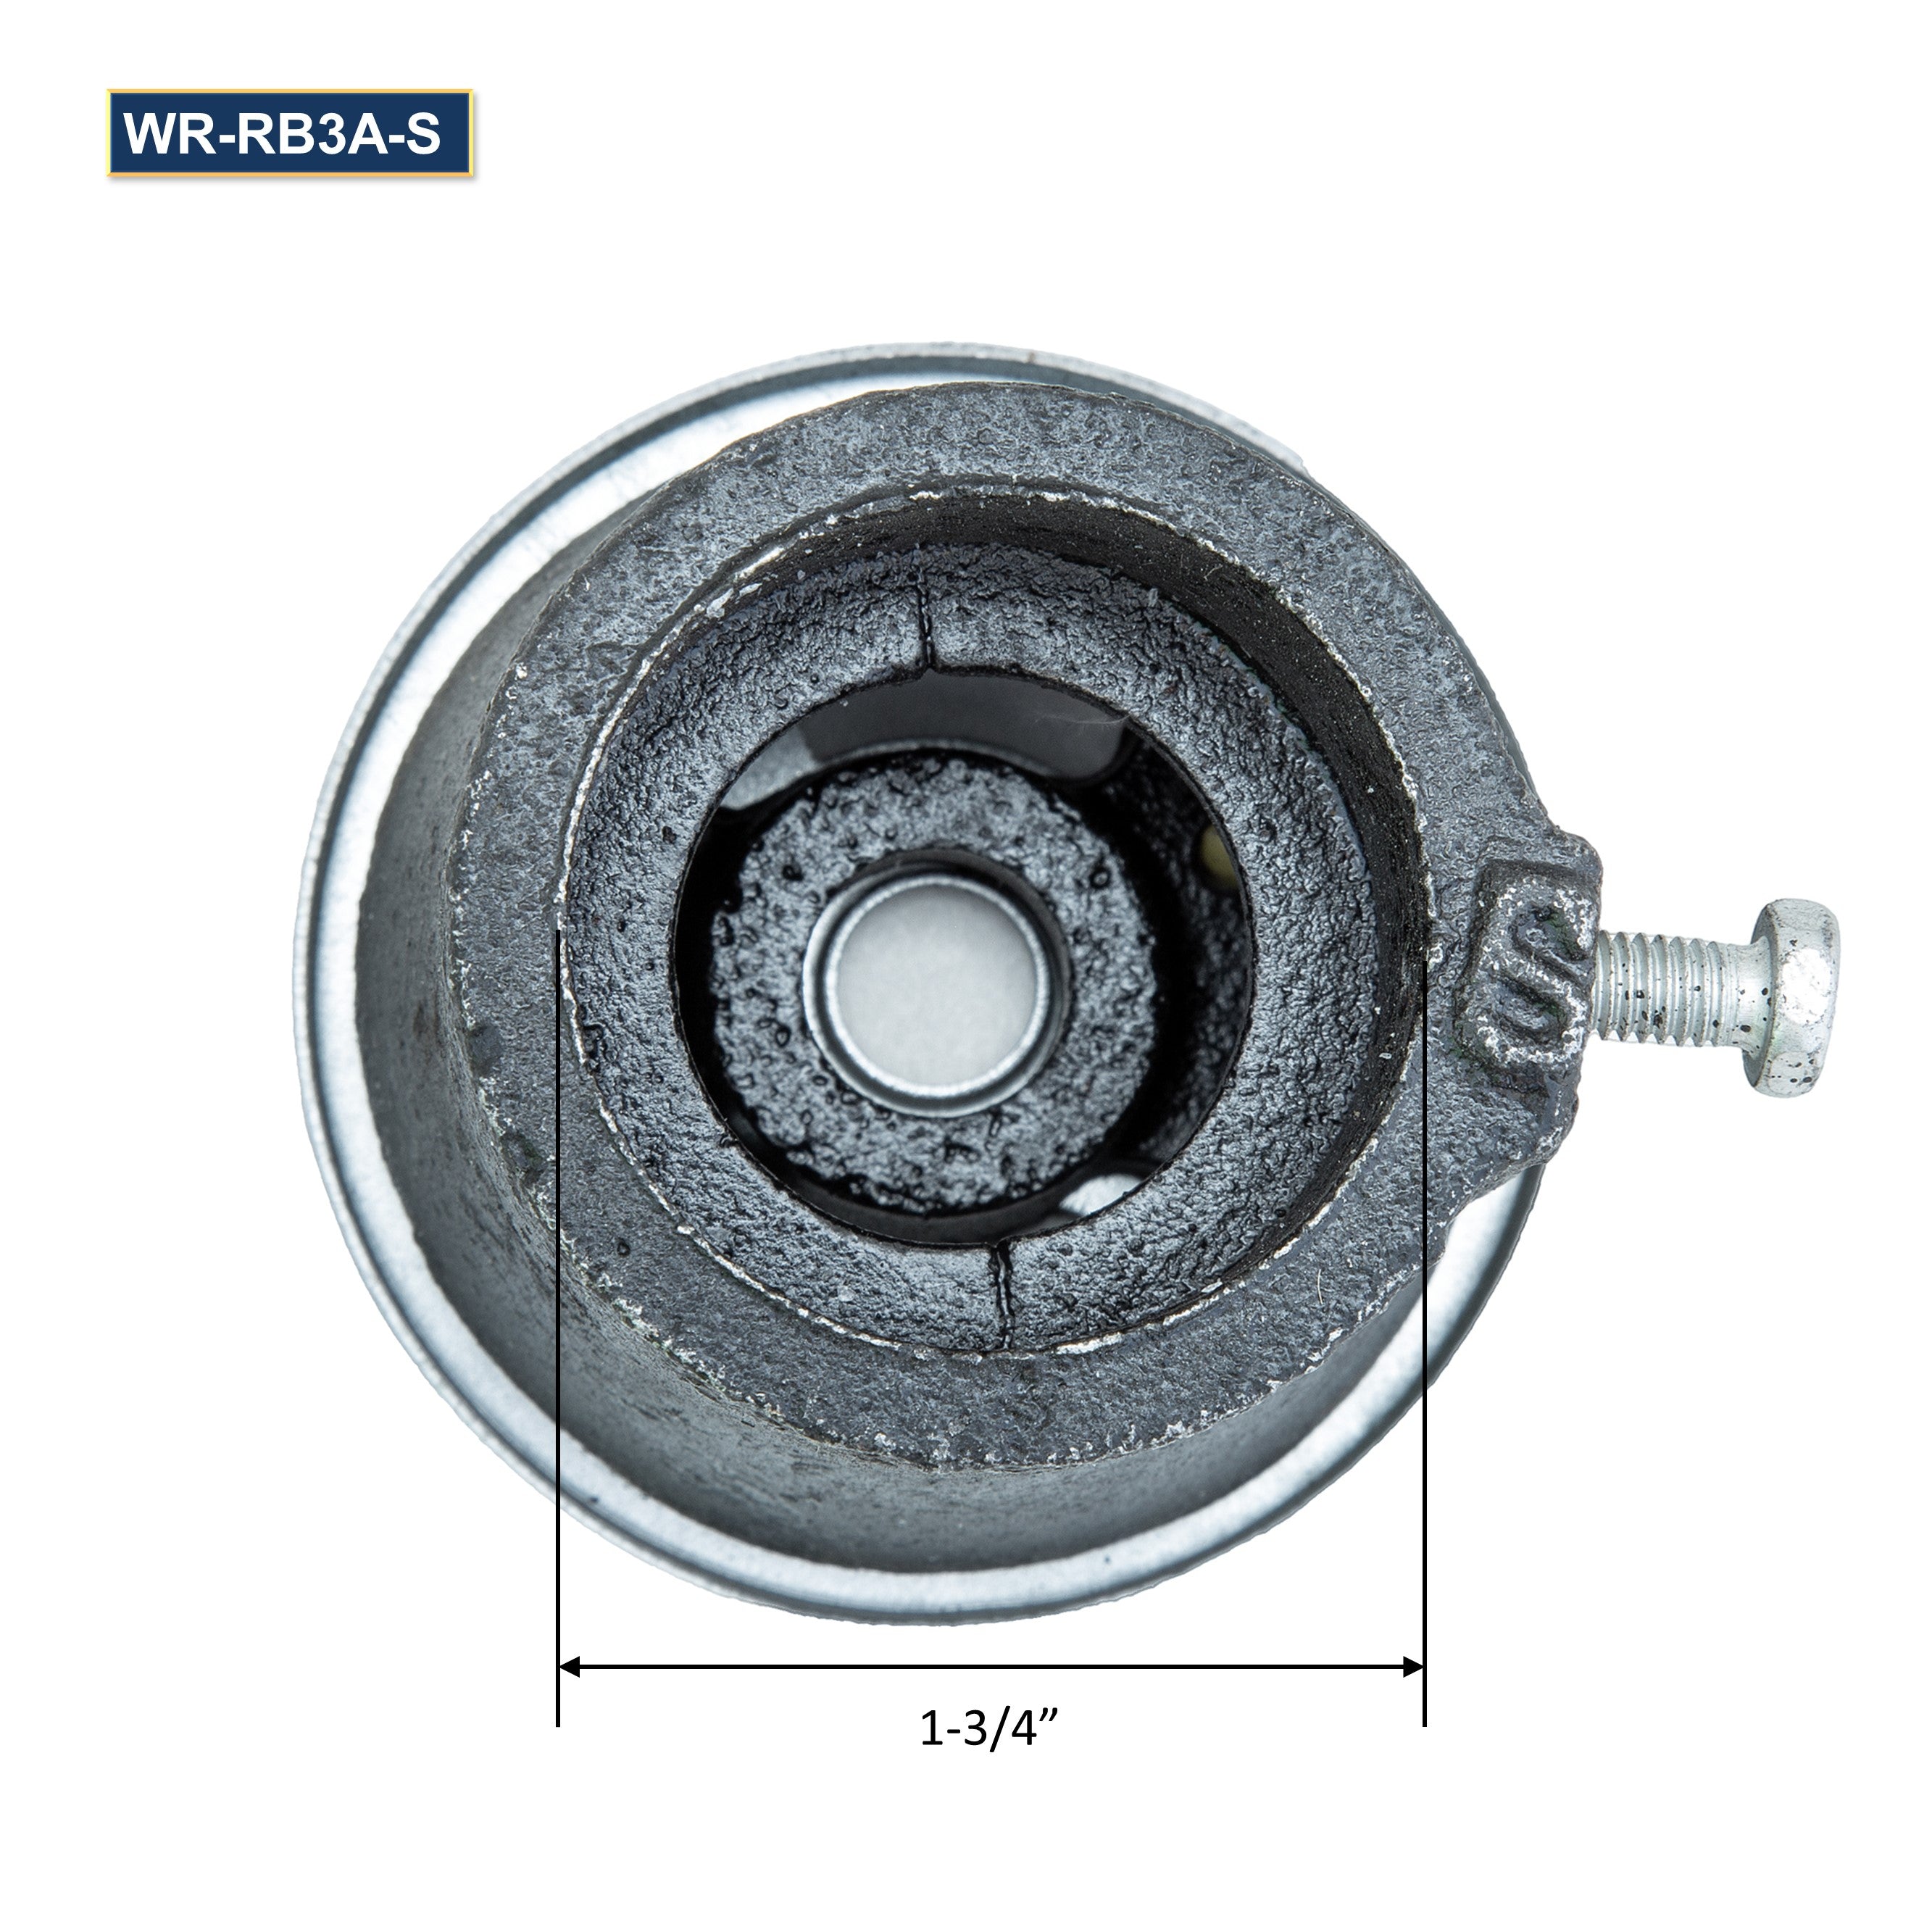 GSW WR-RB2 Two Rings Burner with 1-1/4” Air Shutter, 1-1/4” Pipe 35,000 BTU/HR, Fitting for Stock Pot and Wok Ranges